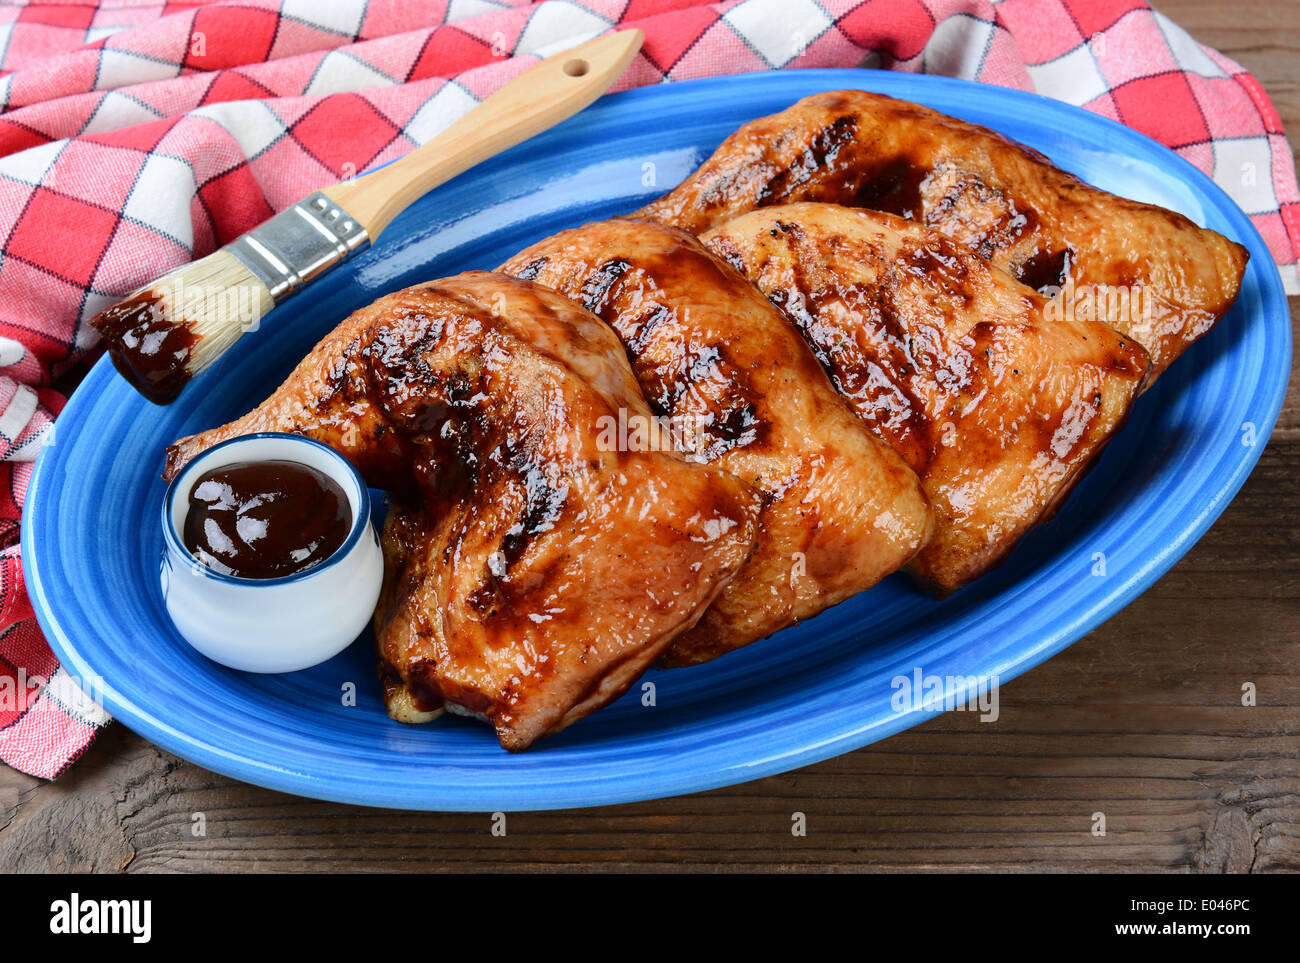 High angle shot of chicken leg quarters on a blue oval platter. The legs have been barbecued and are coated in sauce Stock Photo